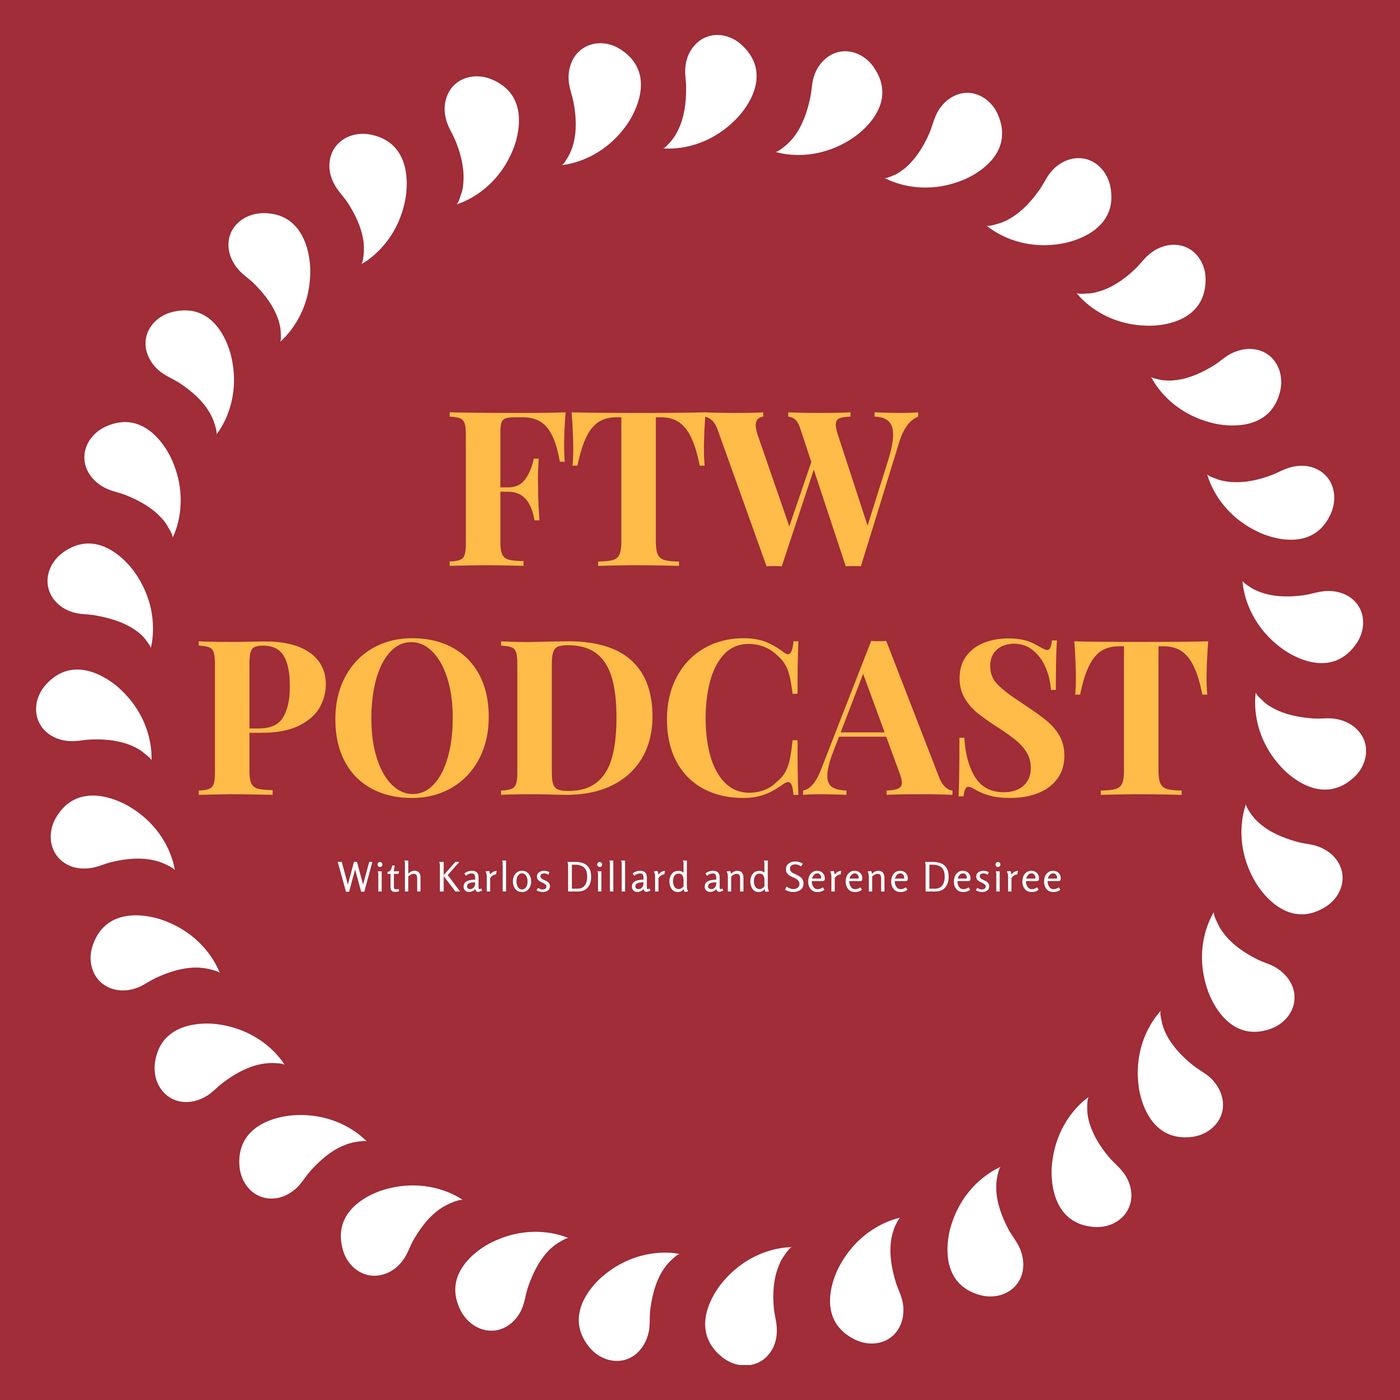 FTW Podcast